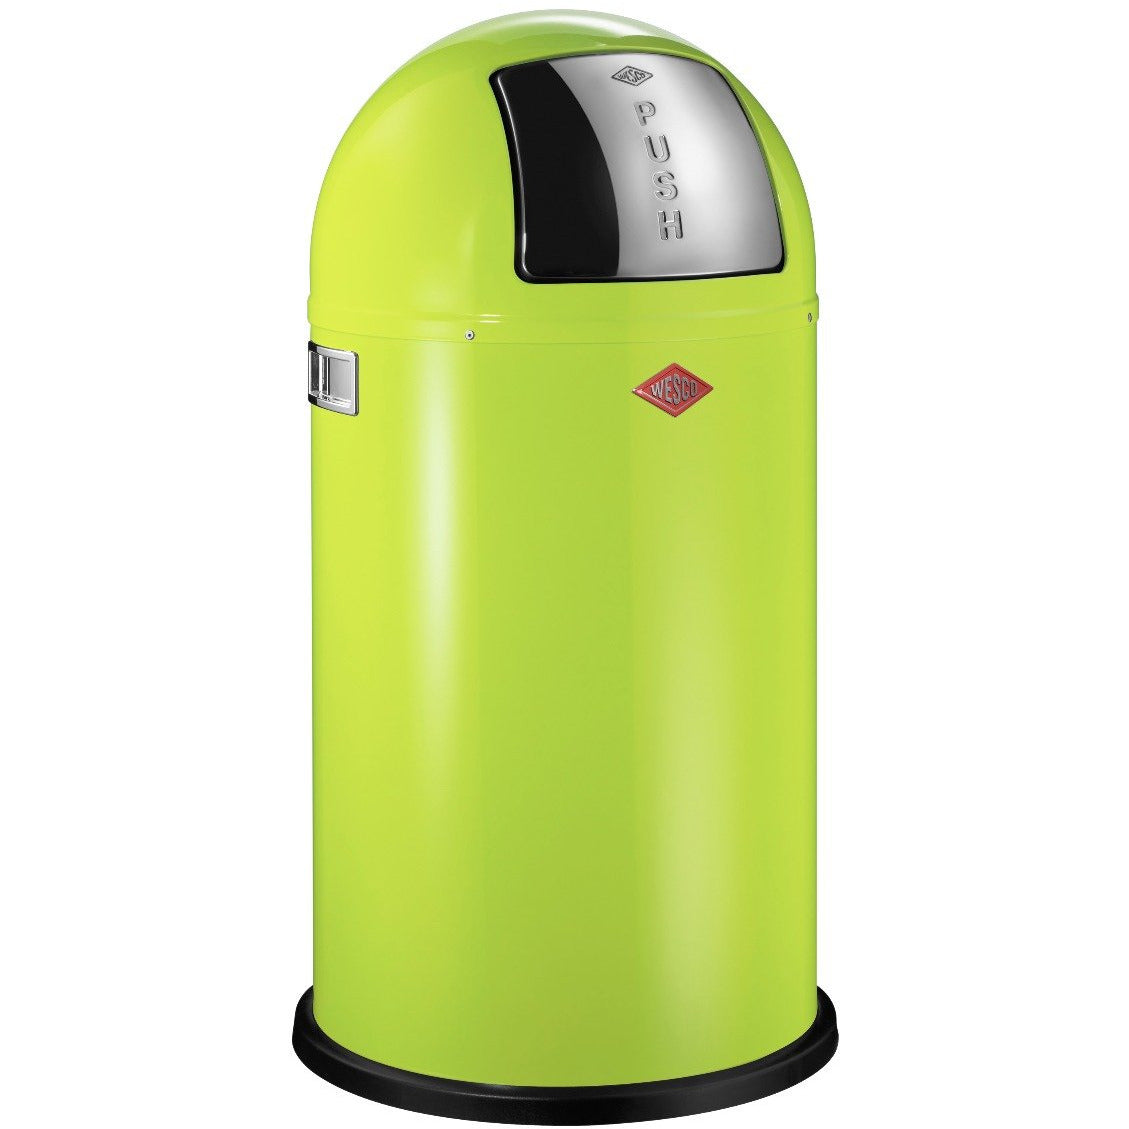 Wesco Pushboy Single Compartment 50 Litre Kitchen Bin in Lime Green: 175831-20